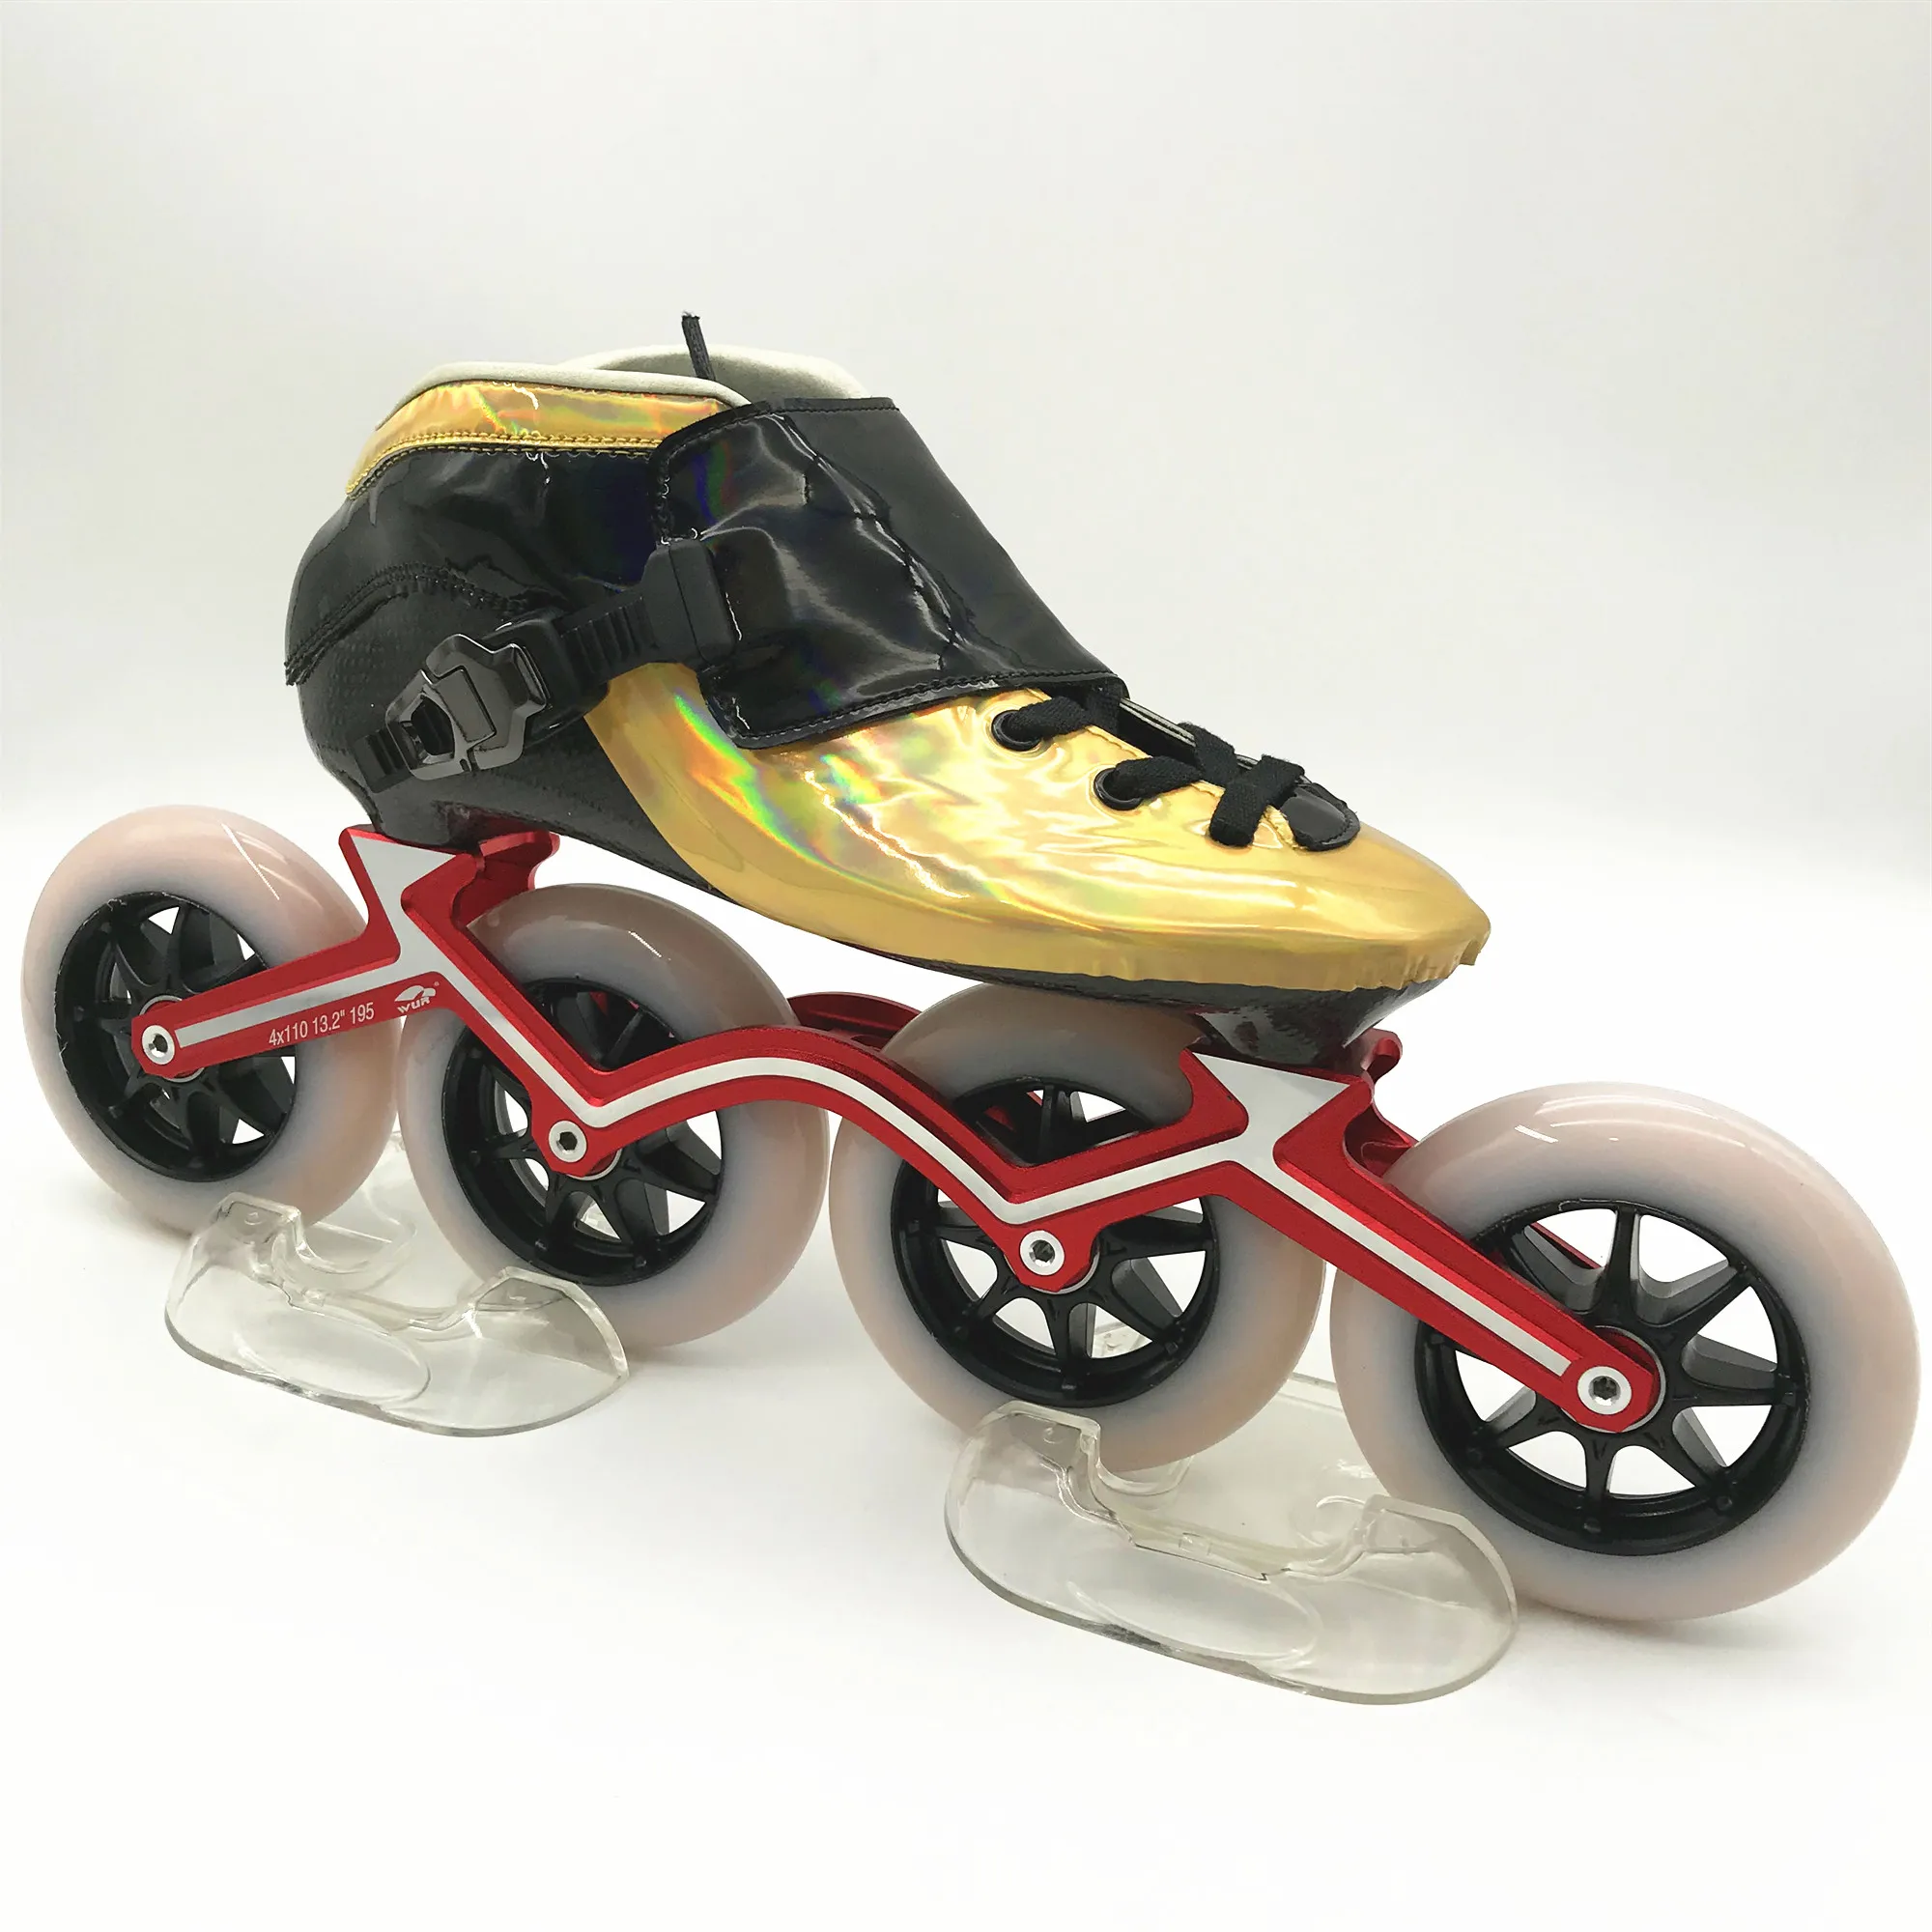 inline skate shoes